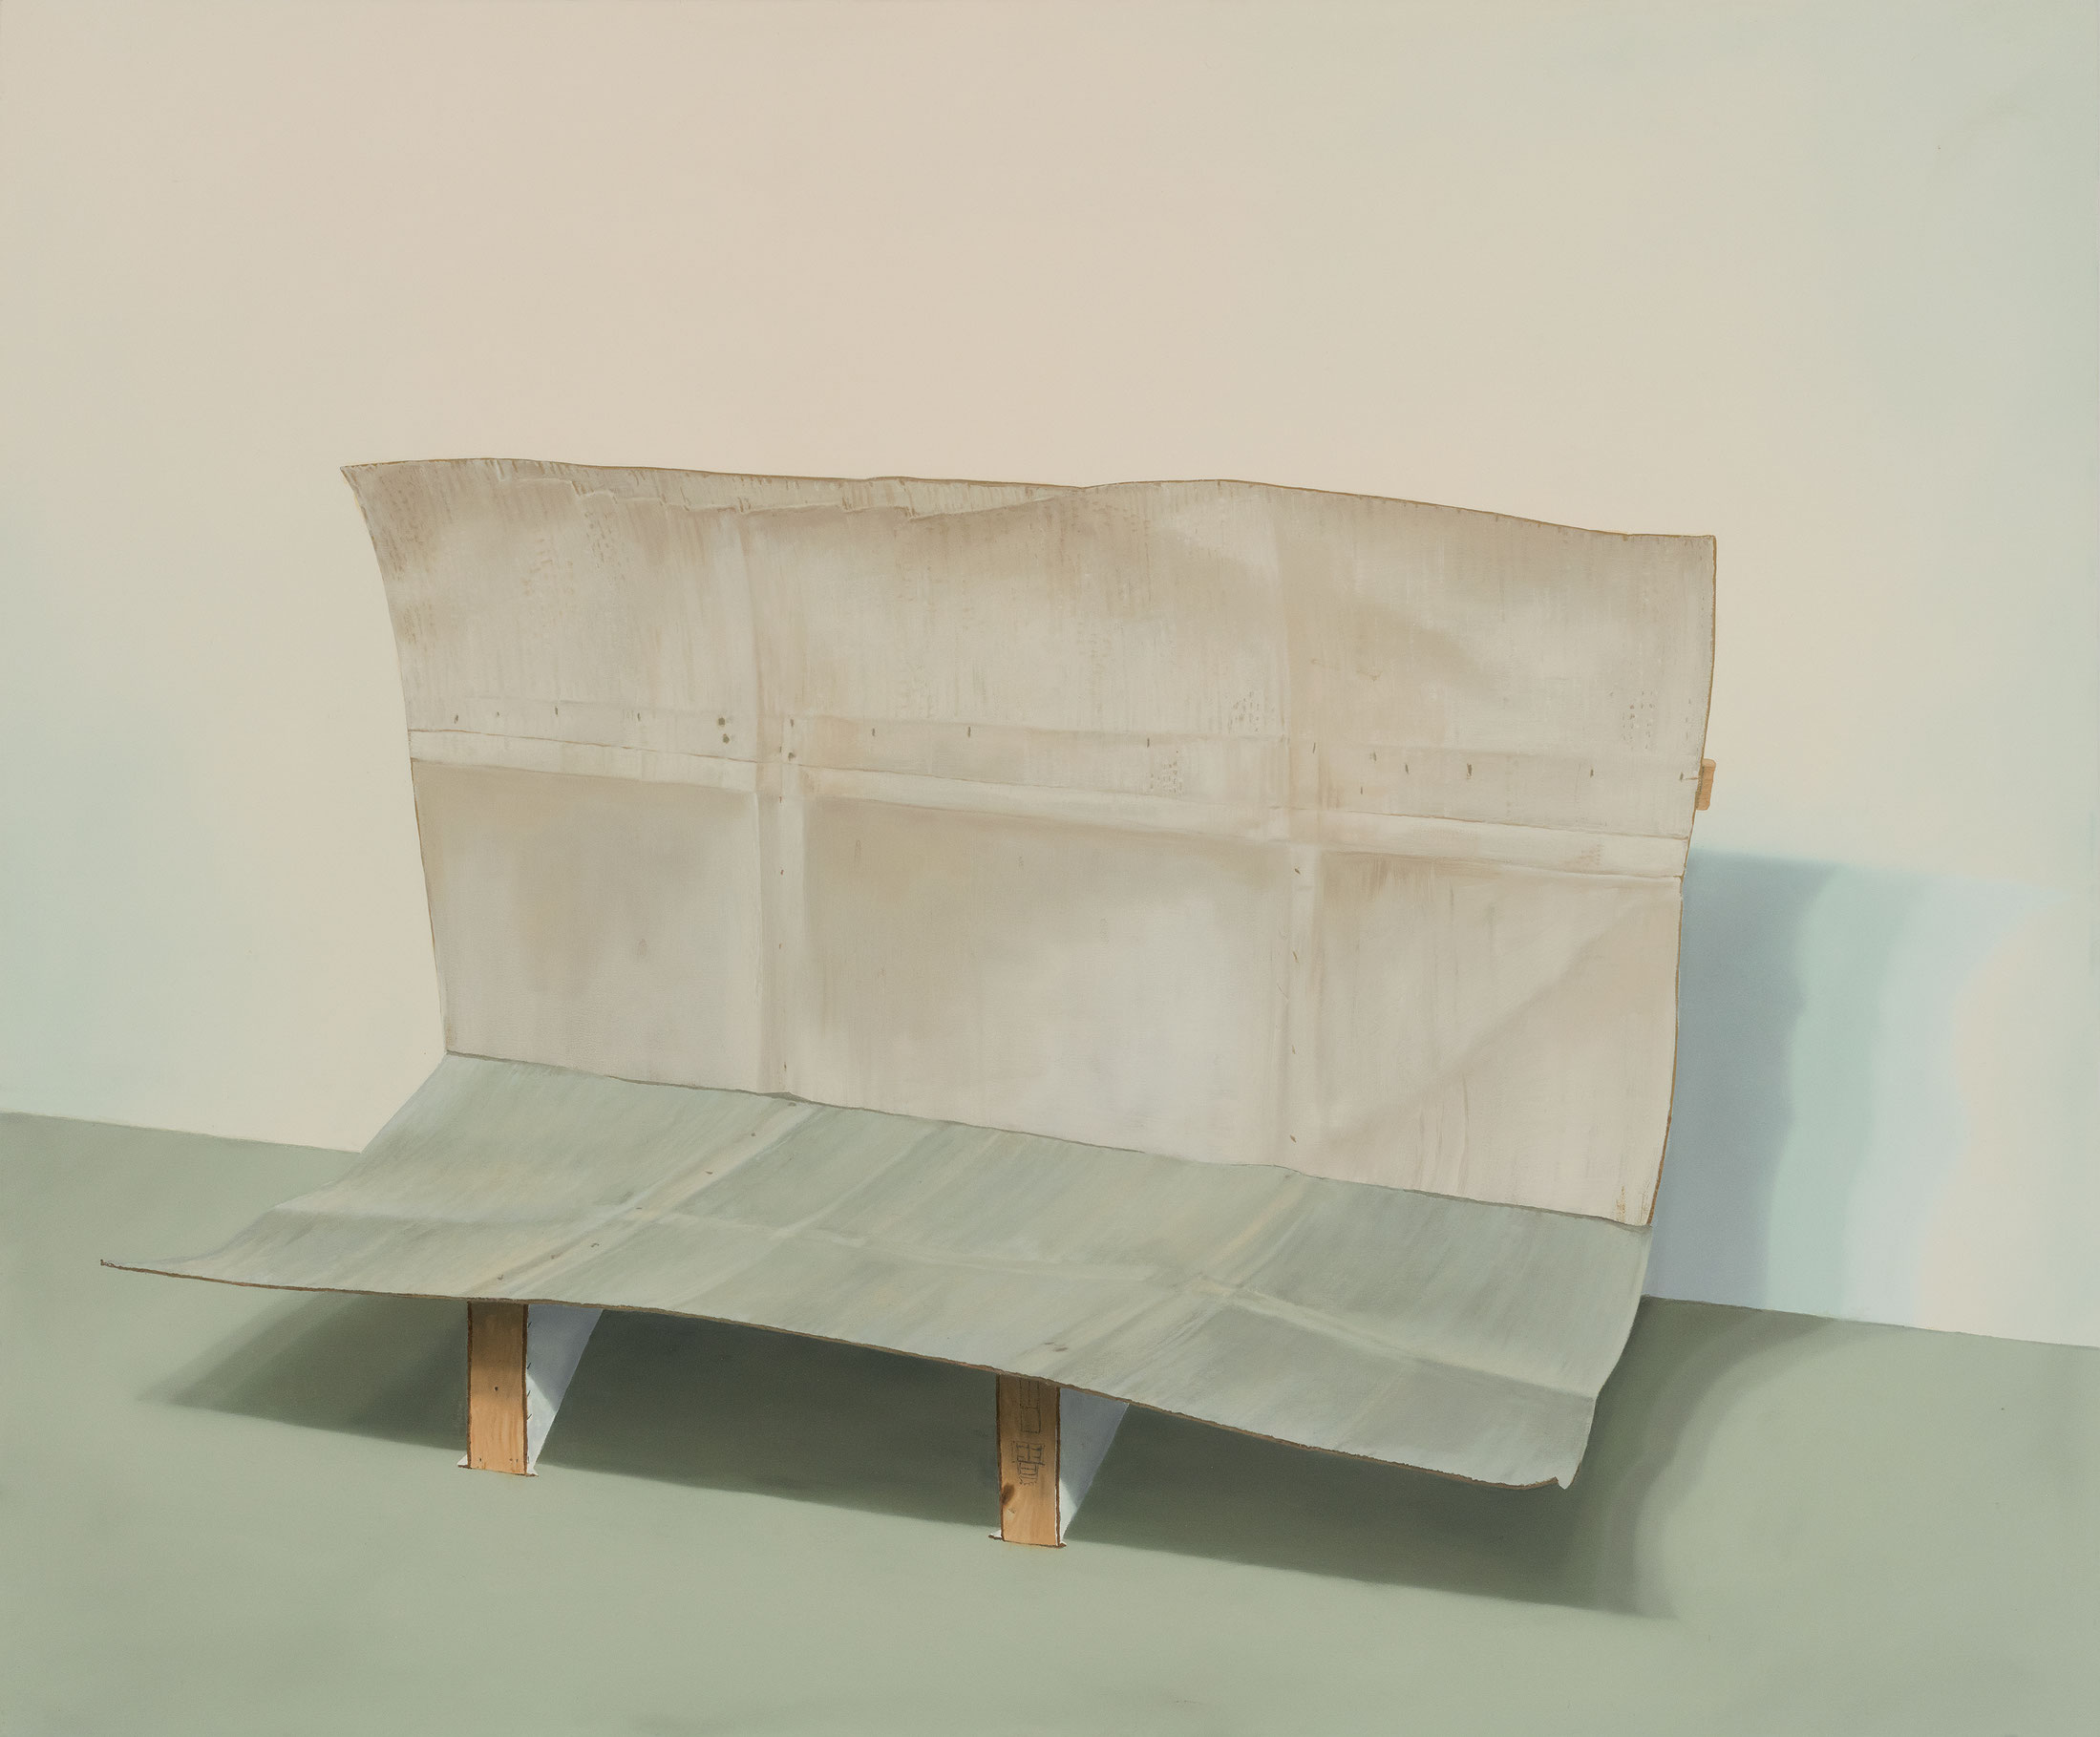 Maquette of Wall and Floor, 2008, Oil on canvas.